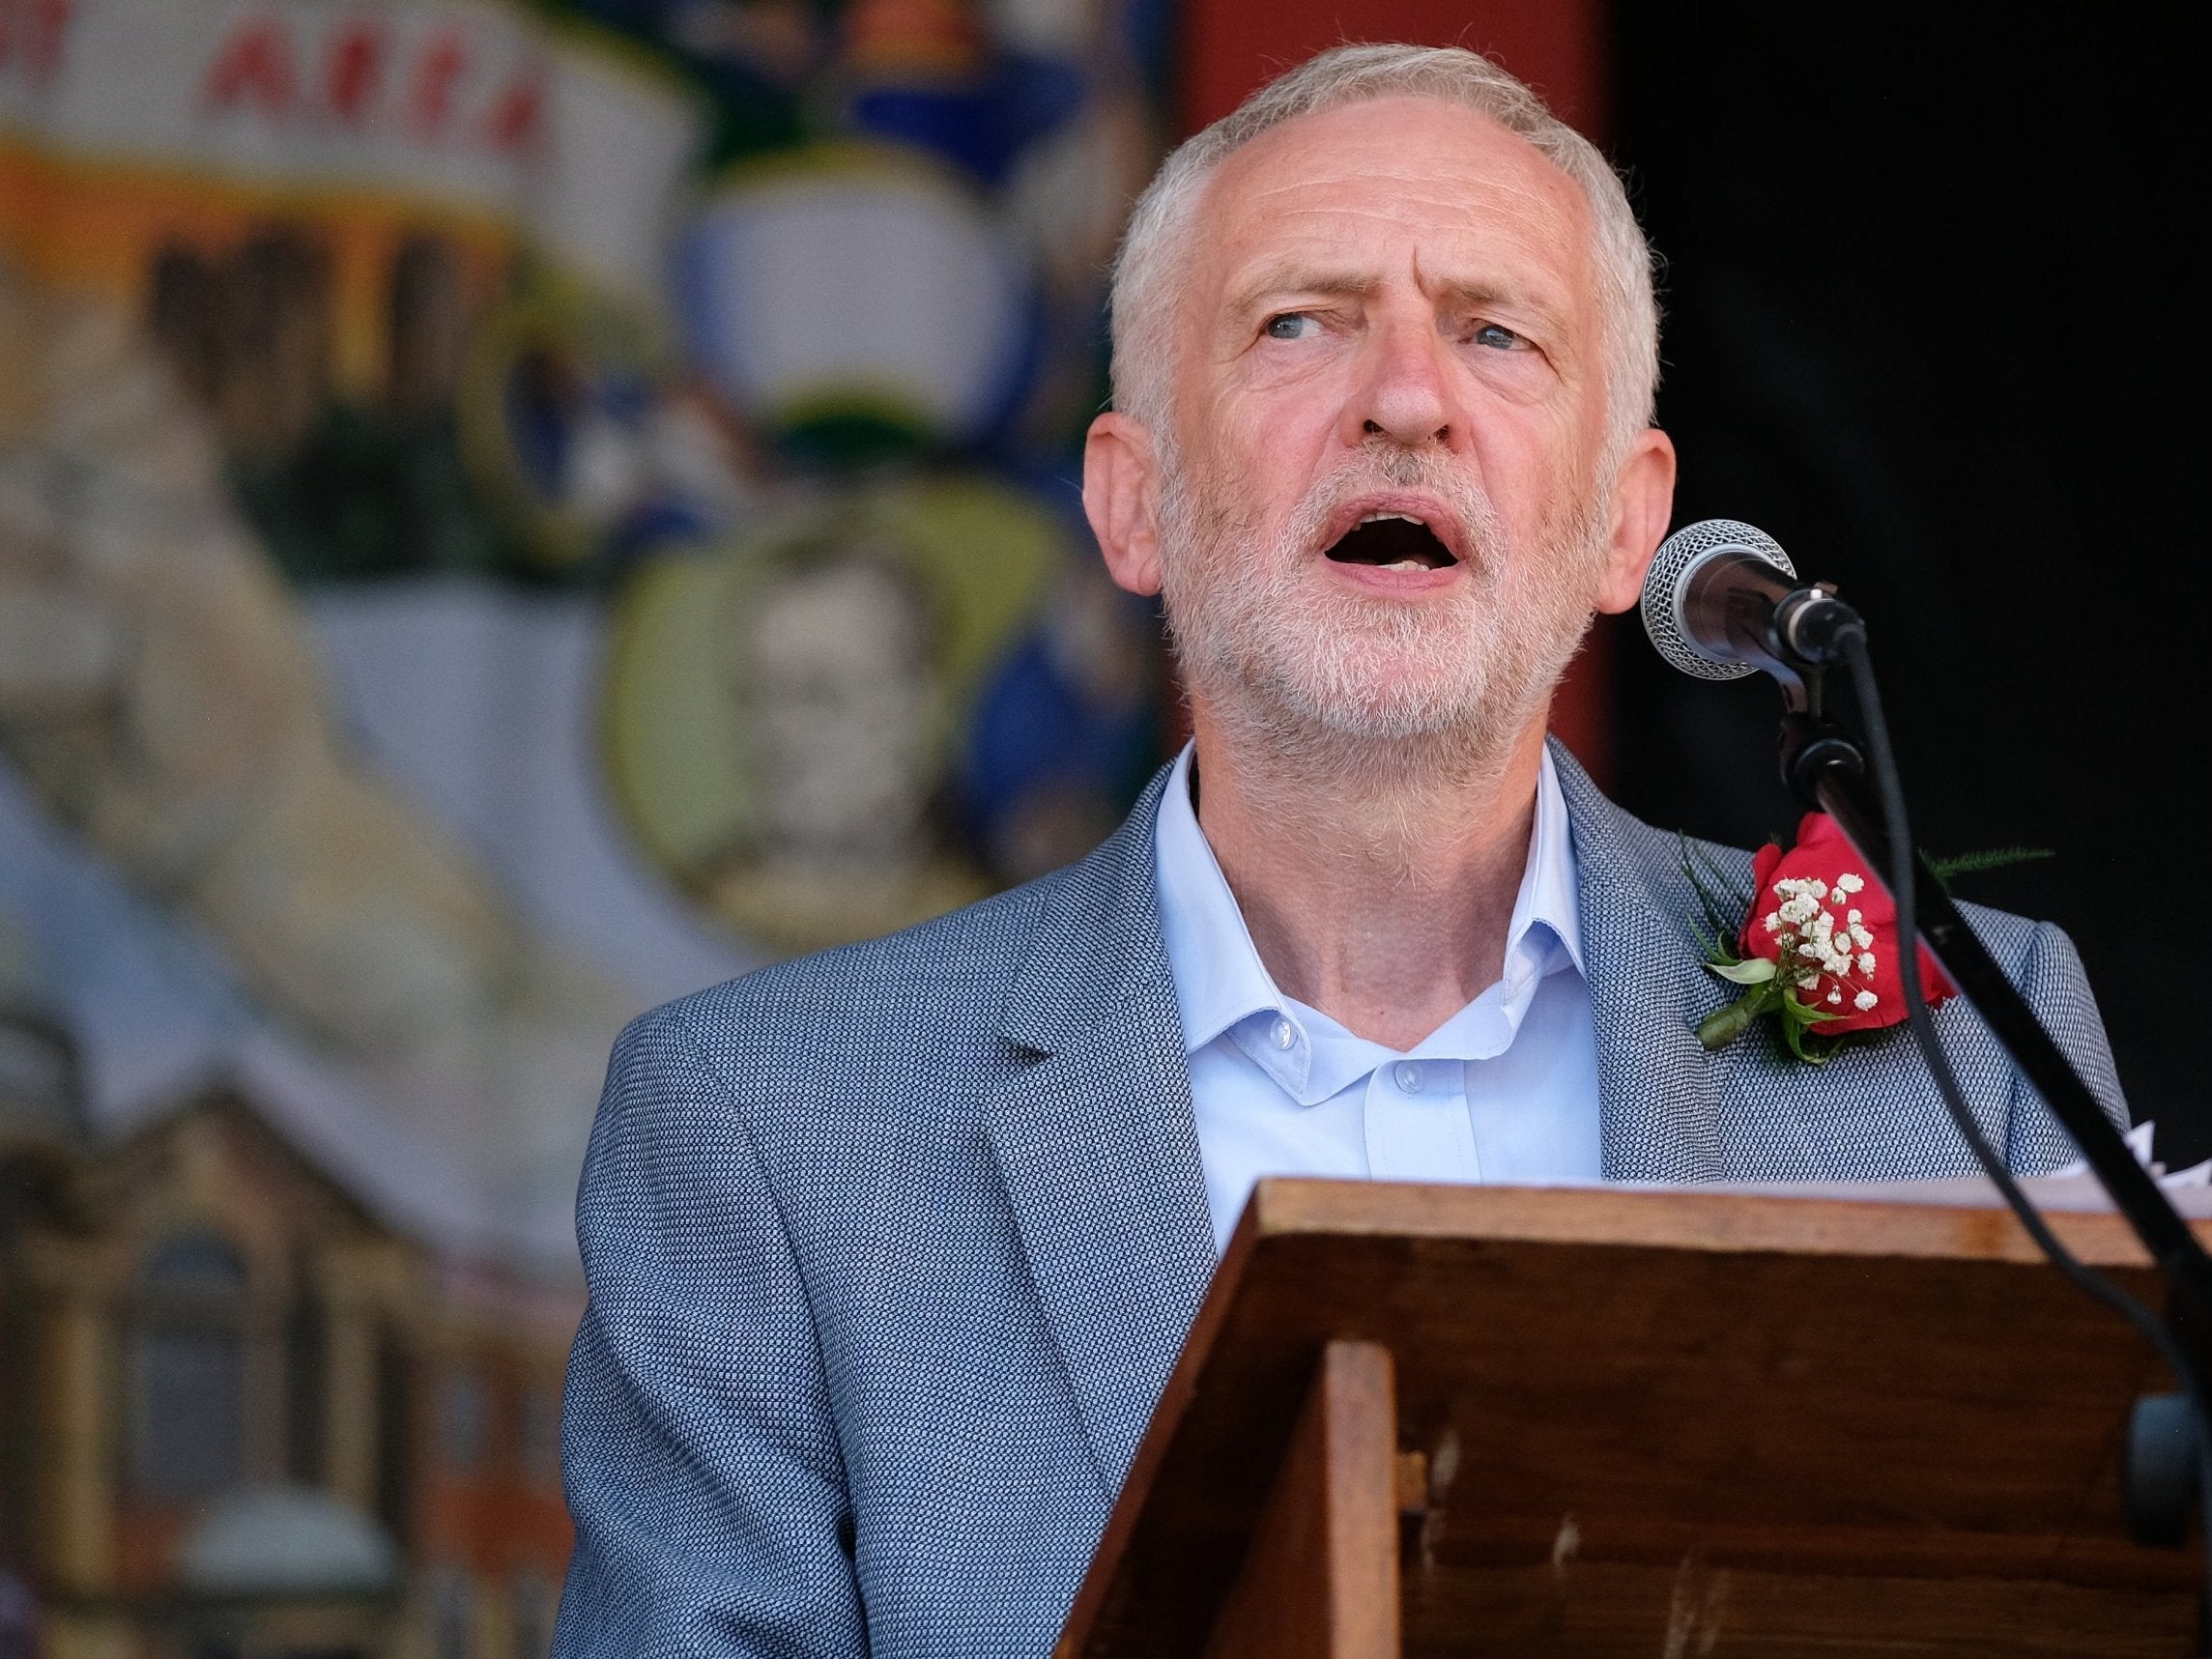 Last week Mr Corbyn said: 'People who dish out antisemitic poison need to understand: you do not do it in my name'